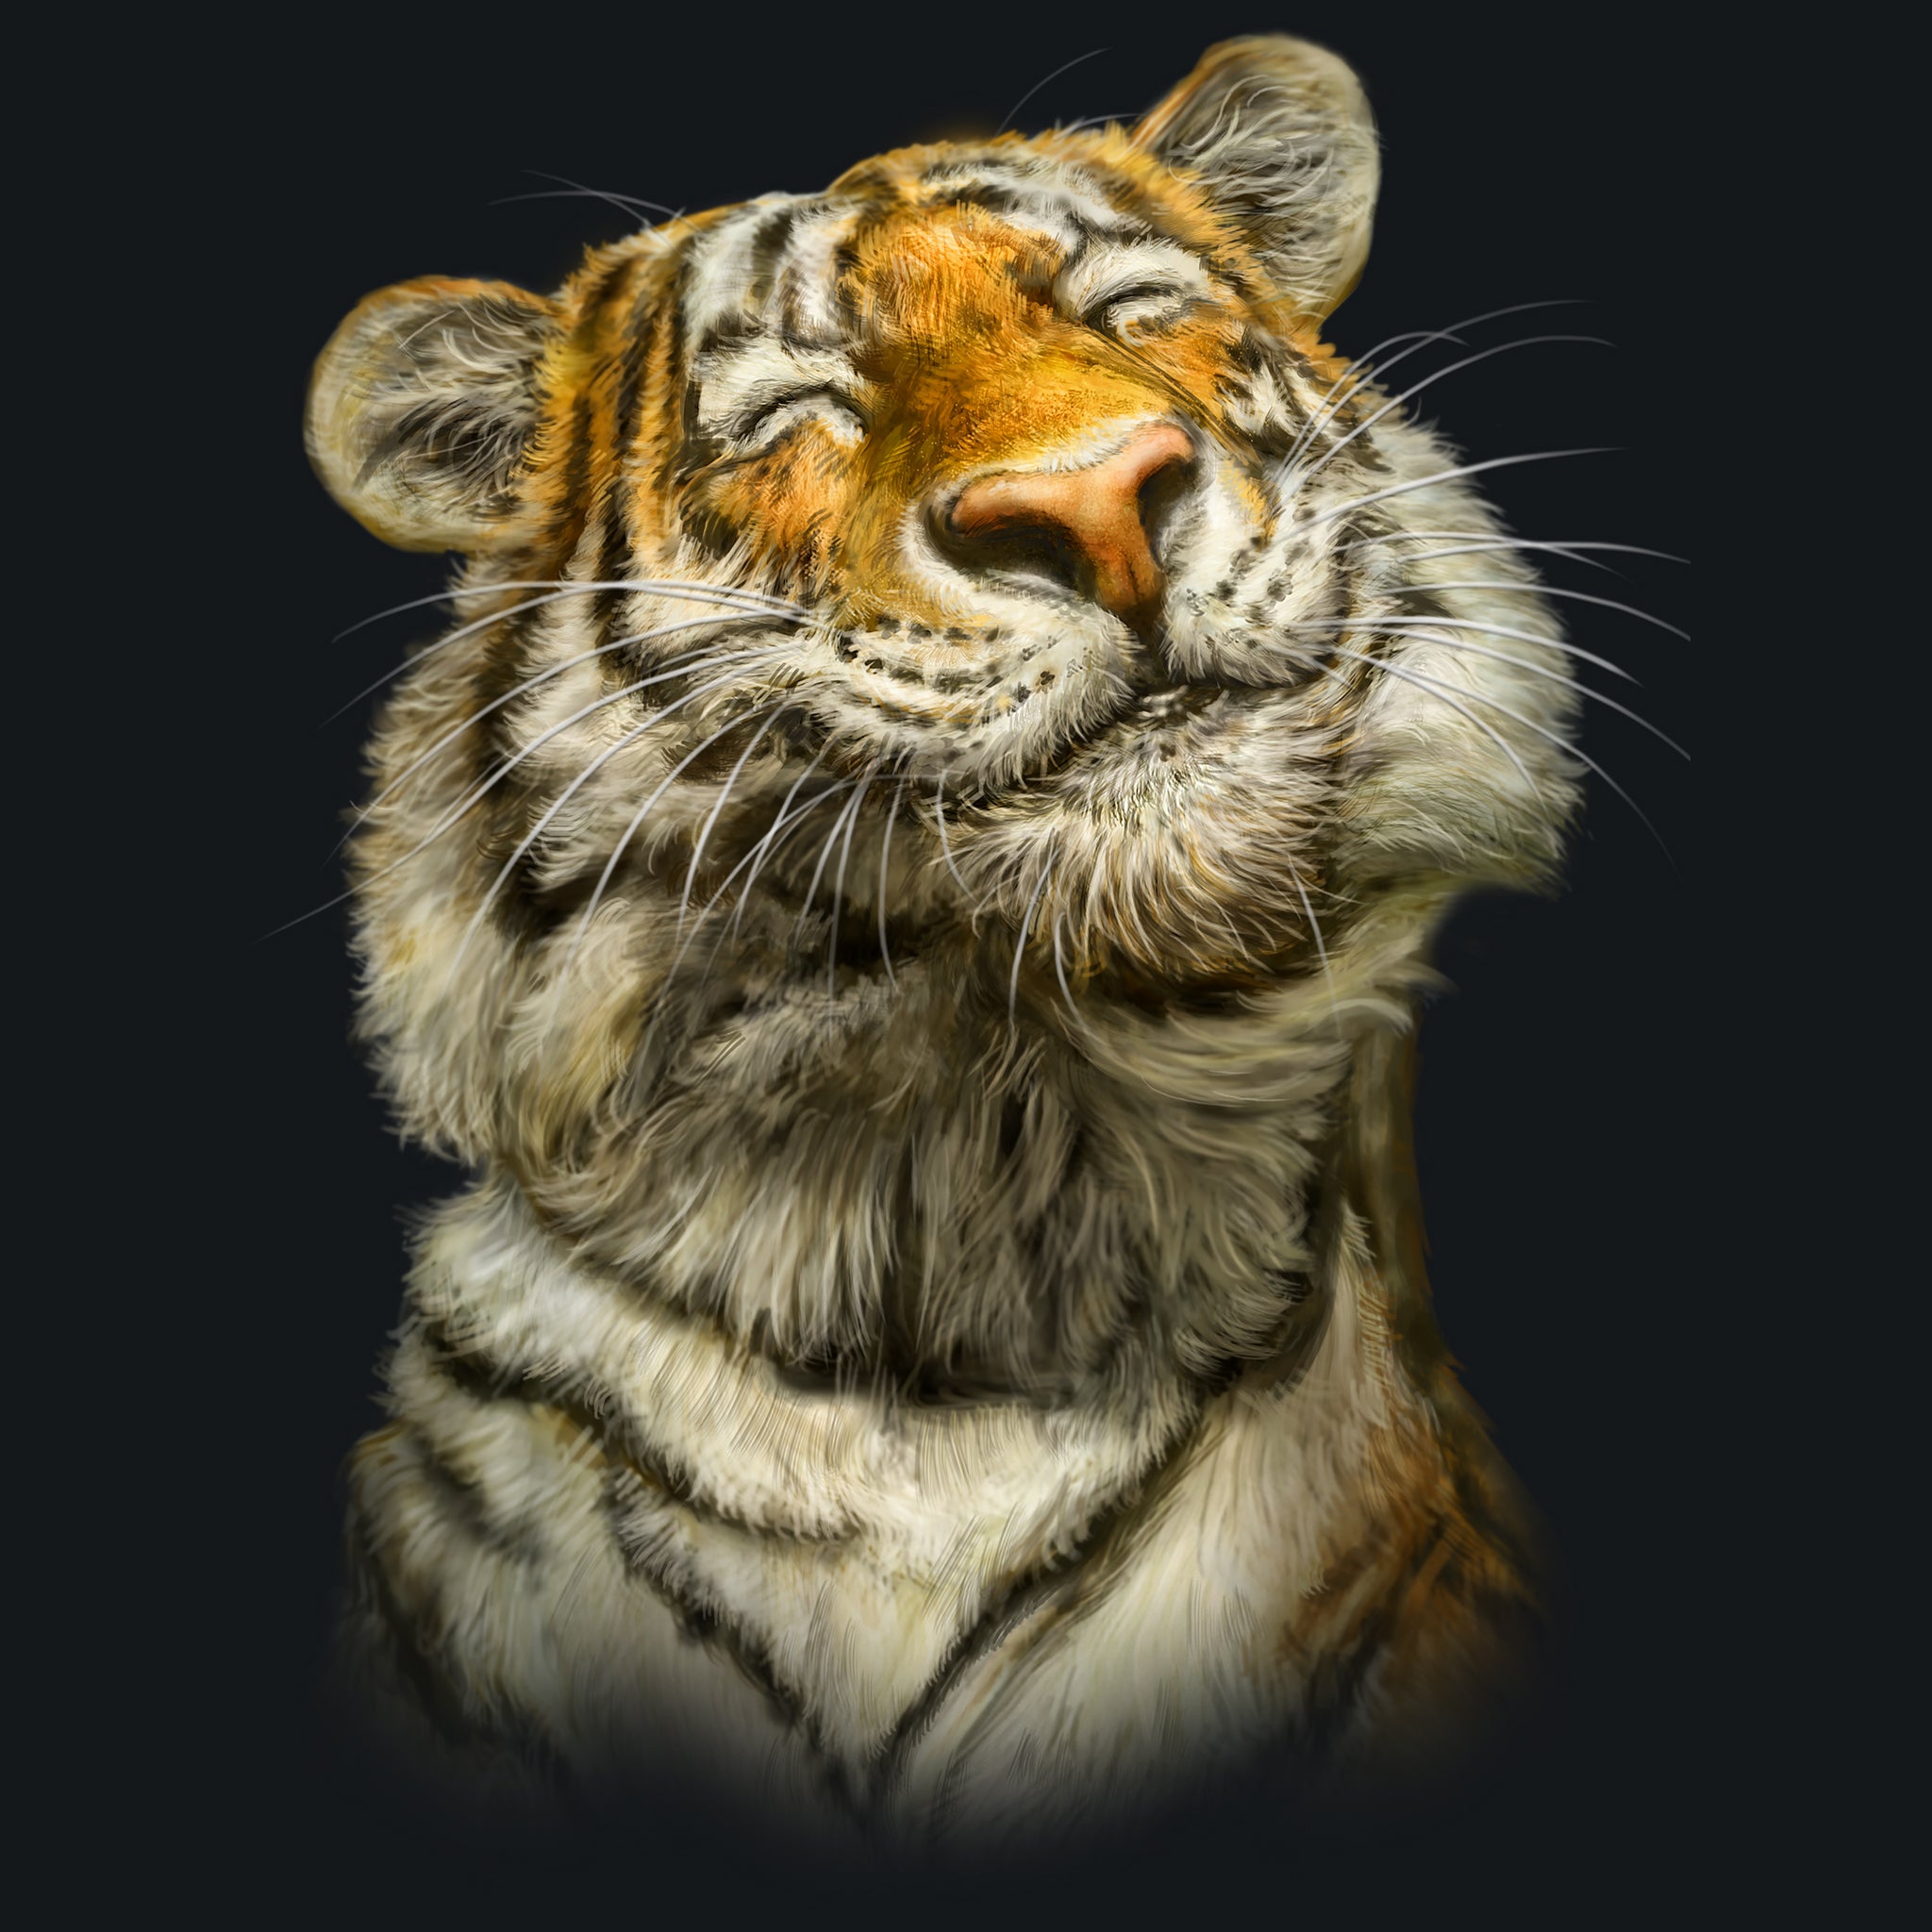 Smiling Tiger by Patrick LaMontagne - painting of a tiger smiling